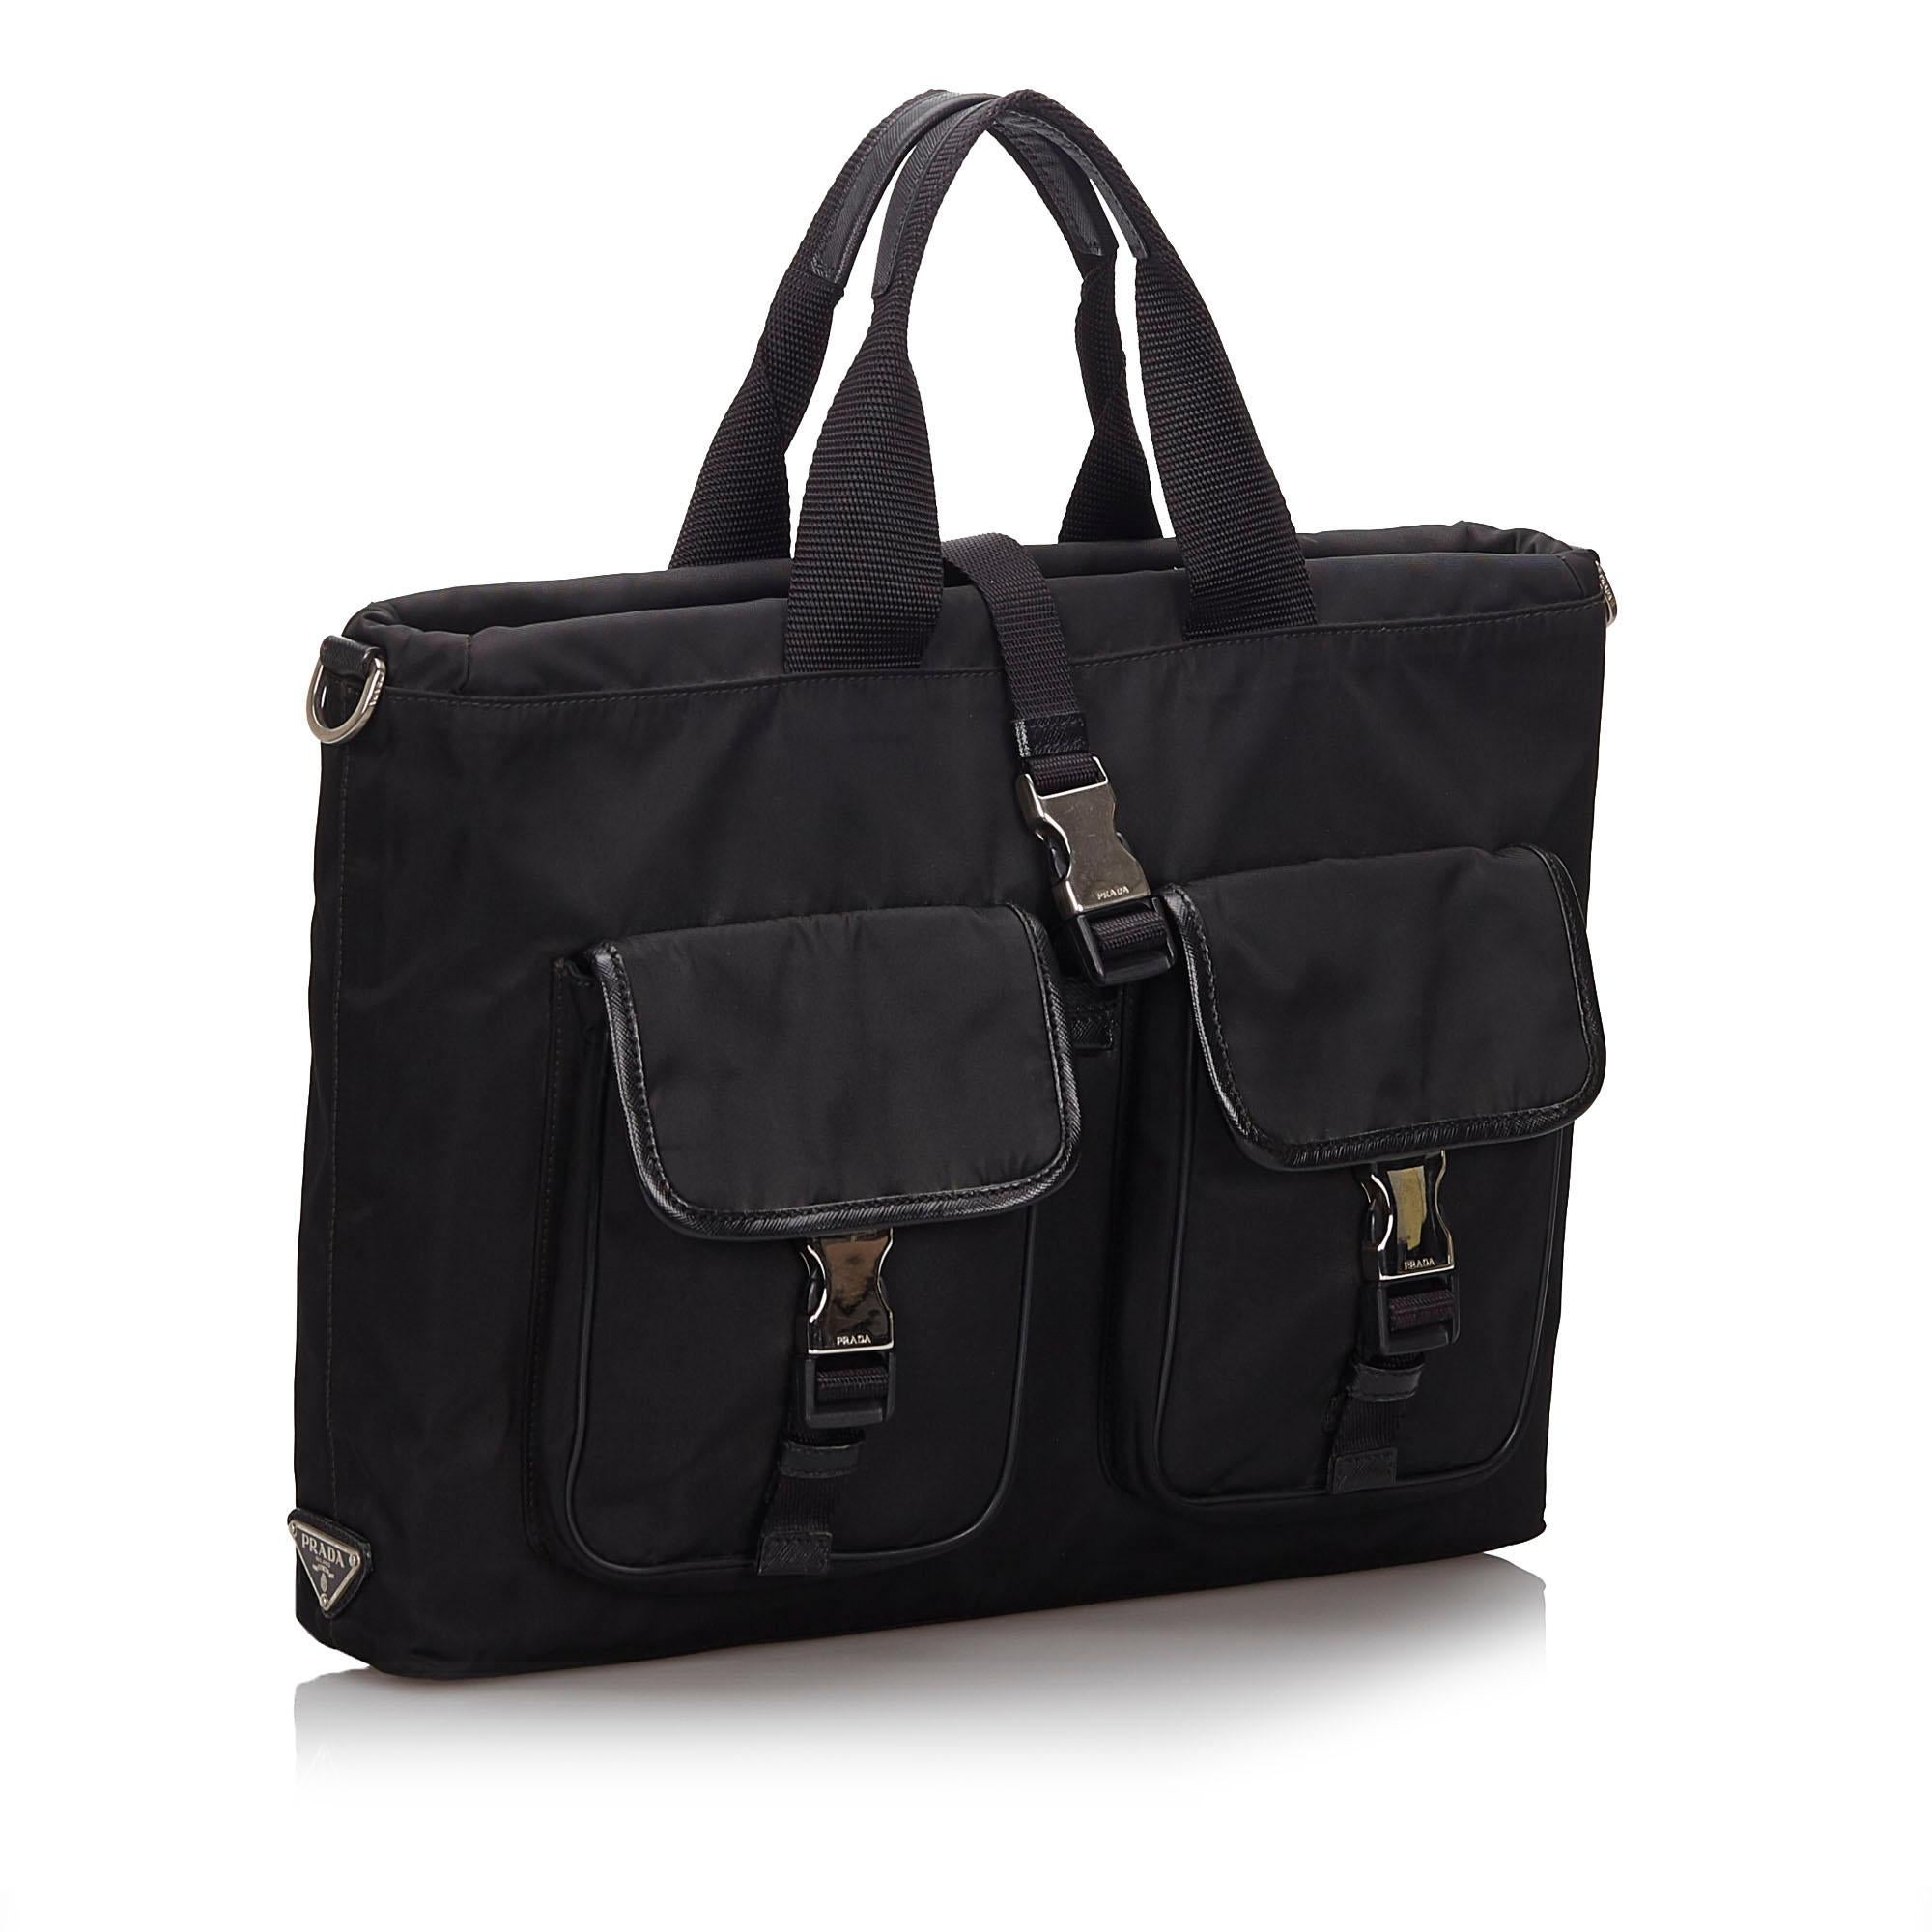 This satchel features a nylon body with leather trim, front exterior flap pockets with buckle closures, a back exterior zip pocket, flat handles, a detachable flat strap, a top strap with a buckle closure, and an open top. It carries as B+ condition